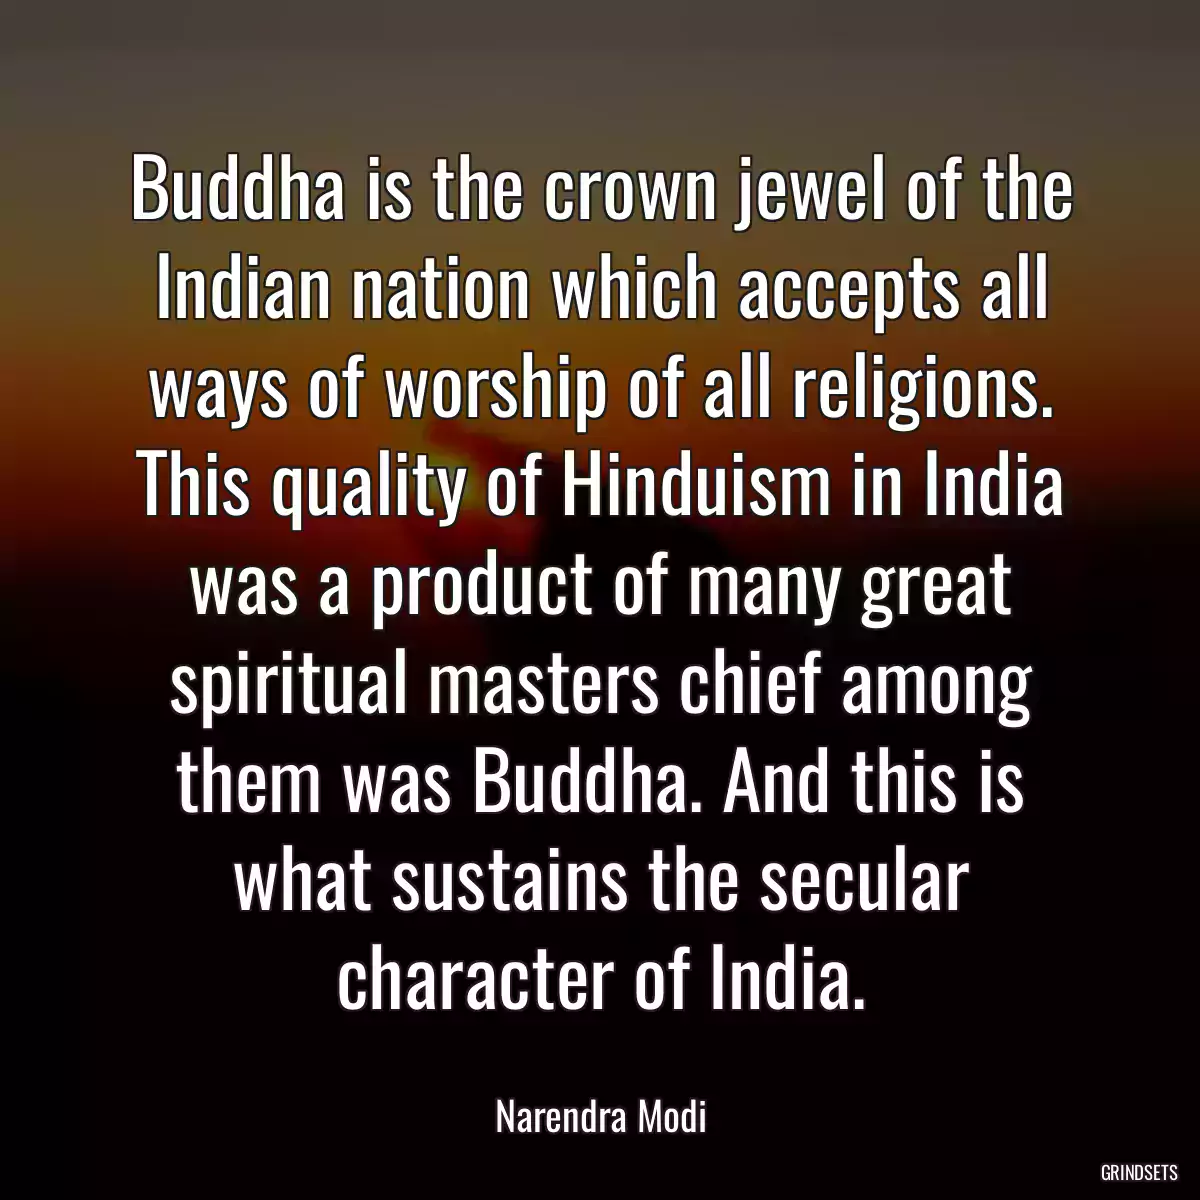 Buddha is the crown jewel of the Indian nation which accepts all ways of worship of all religions. This quality of Hinduism in India was a product of many great spiritual masters chief among them was Buddha. And this is what sustains the secular character of India.